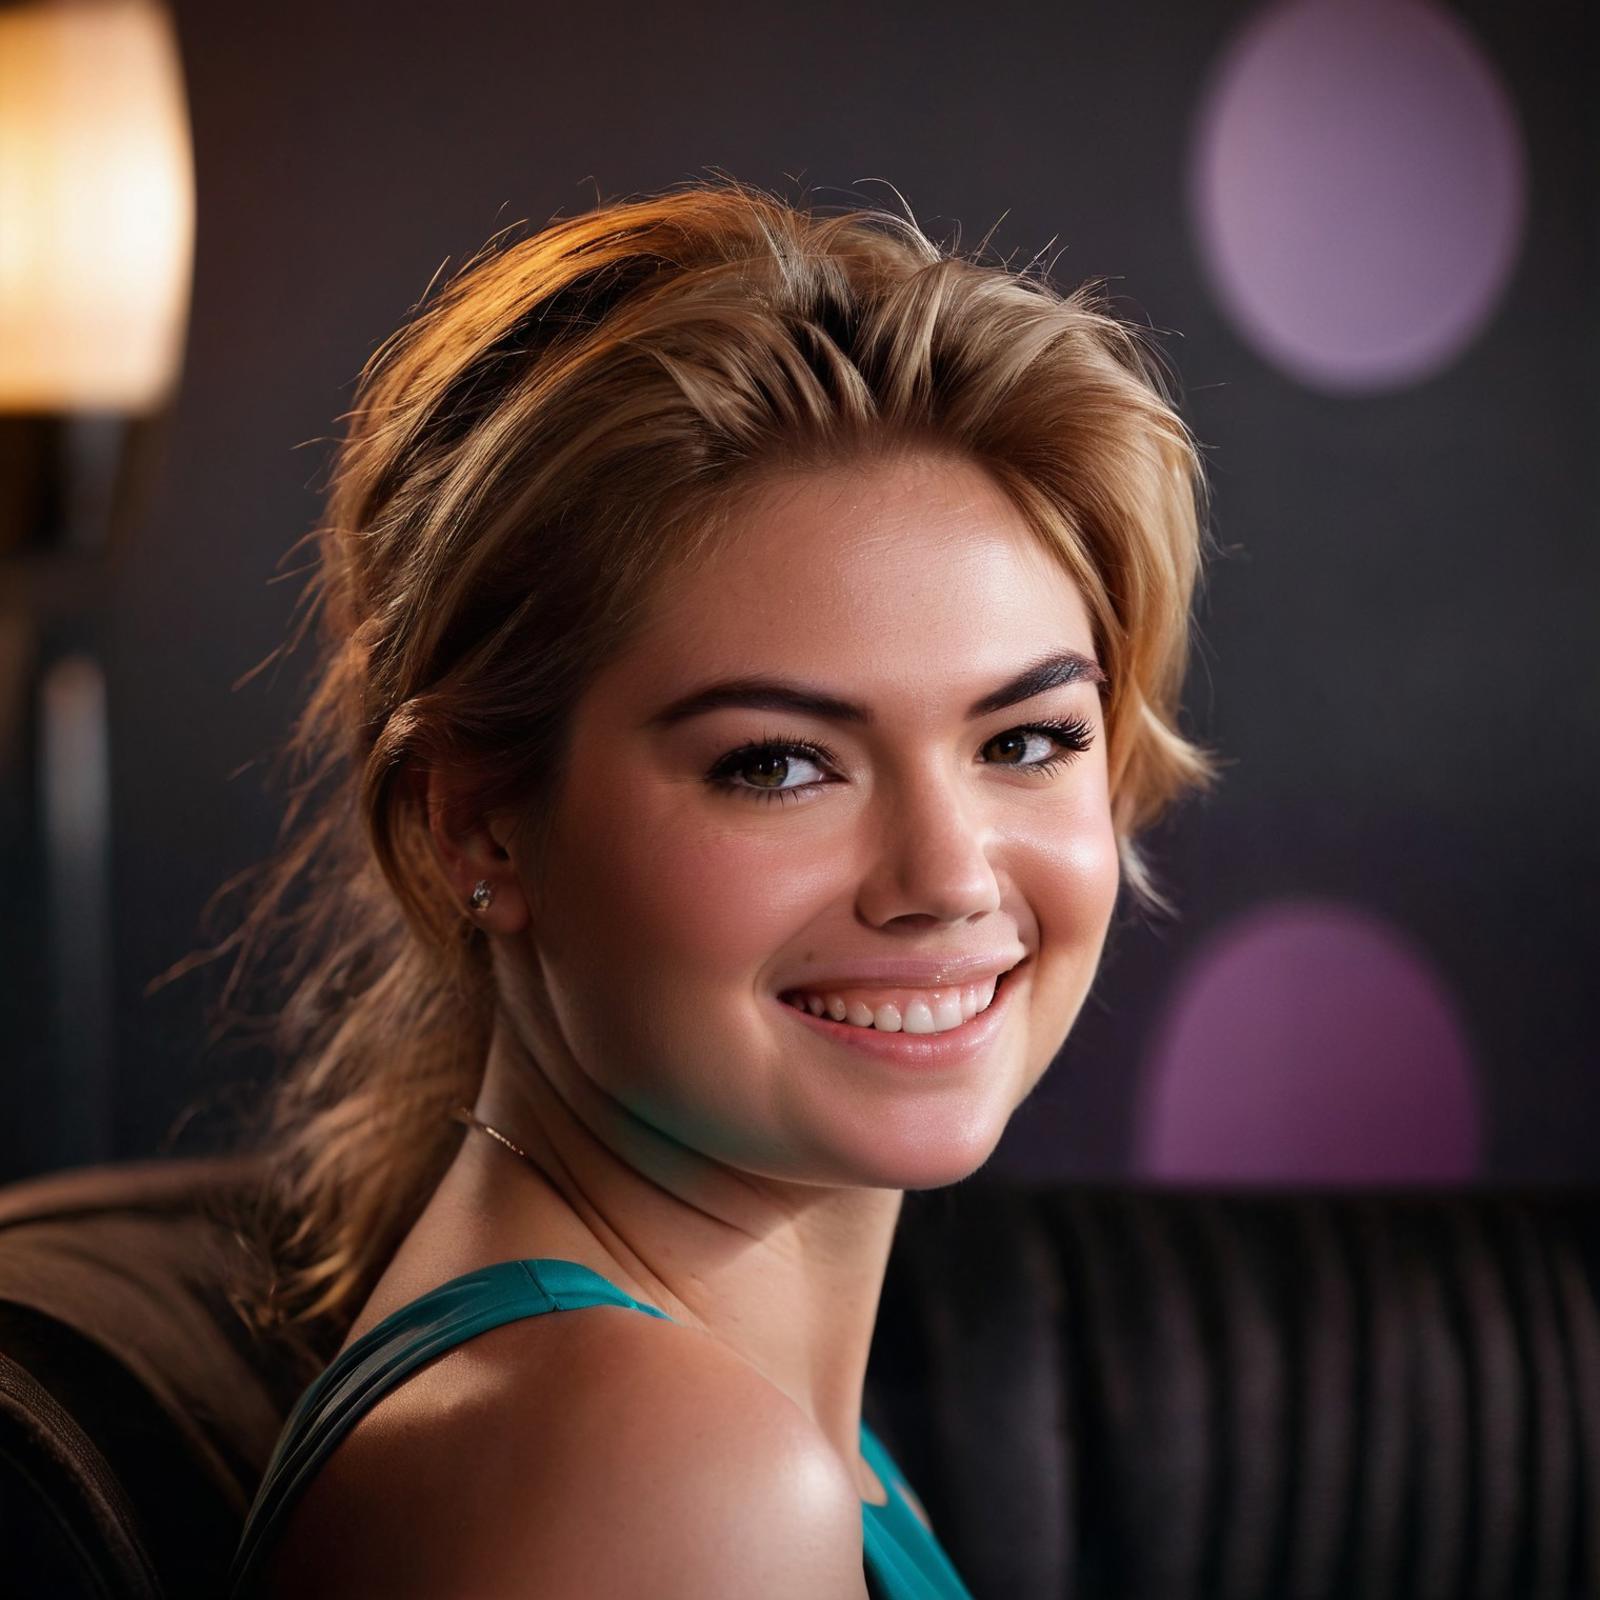 Kate Upton XL image by ManOfCulture